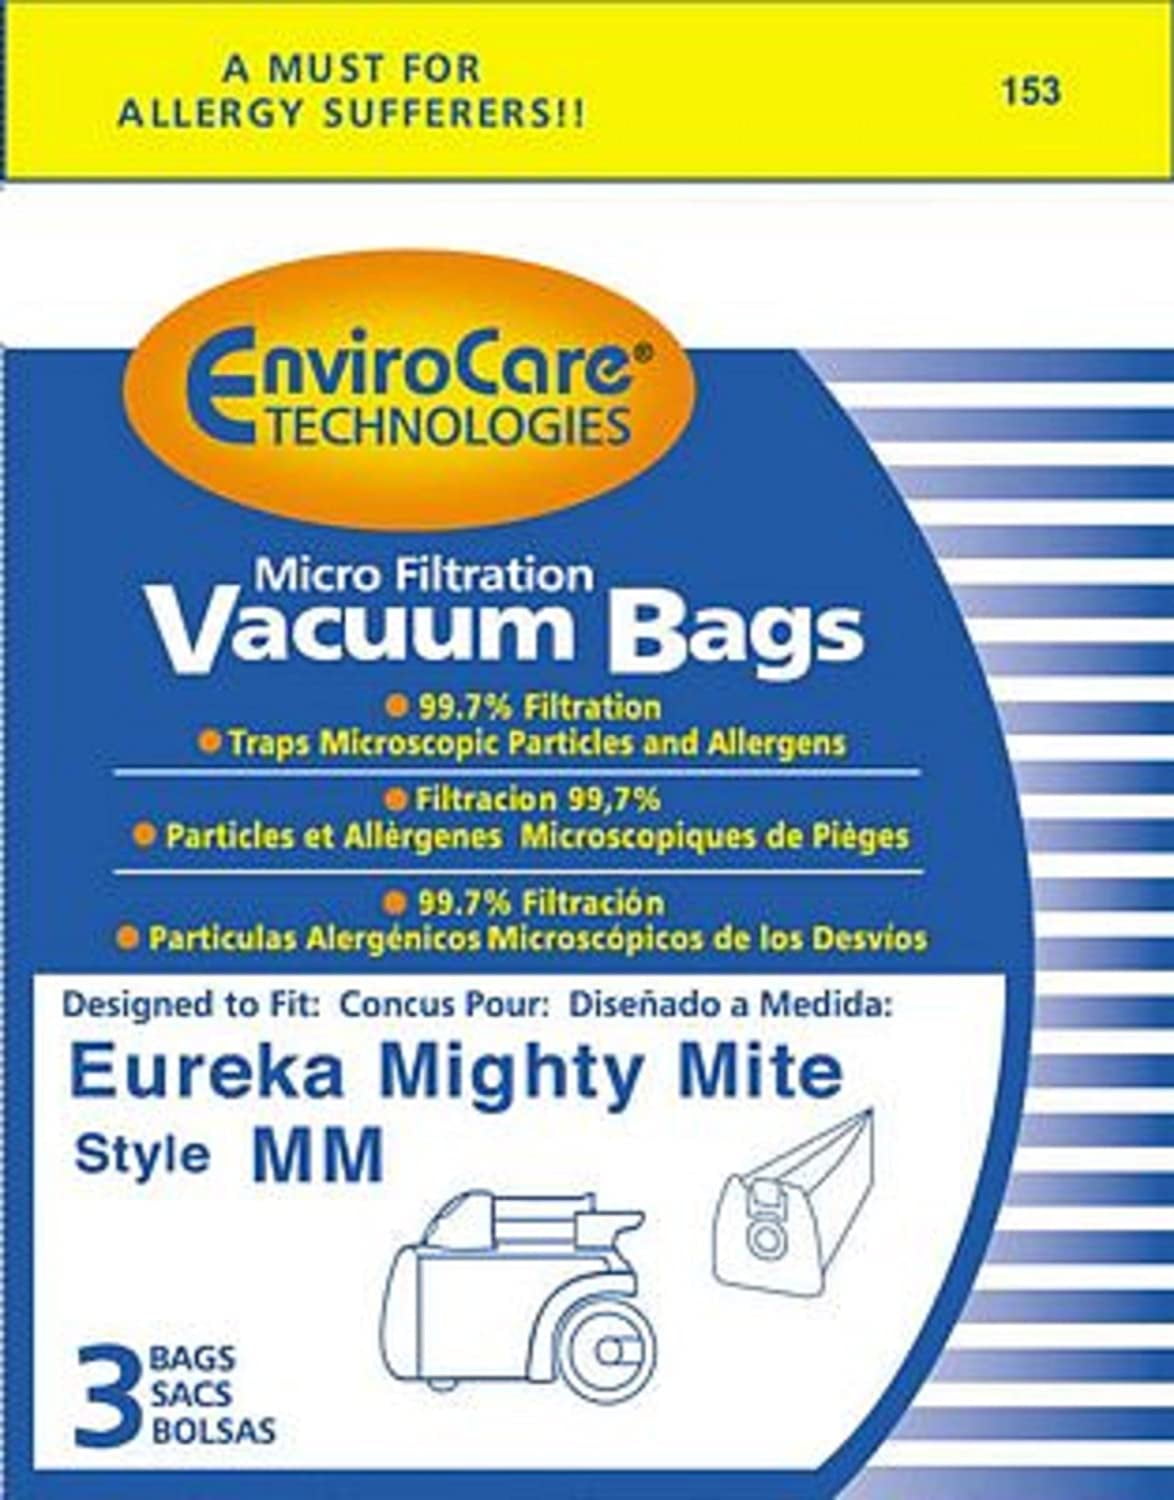 Mini Mite Canister Vacu 12 Eureka Style L Allergy Micron Filtration Vacuum Bags 